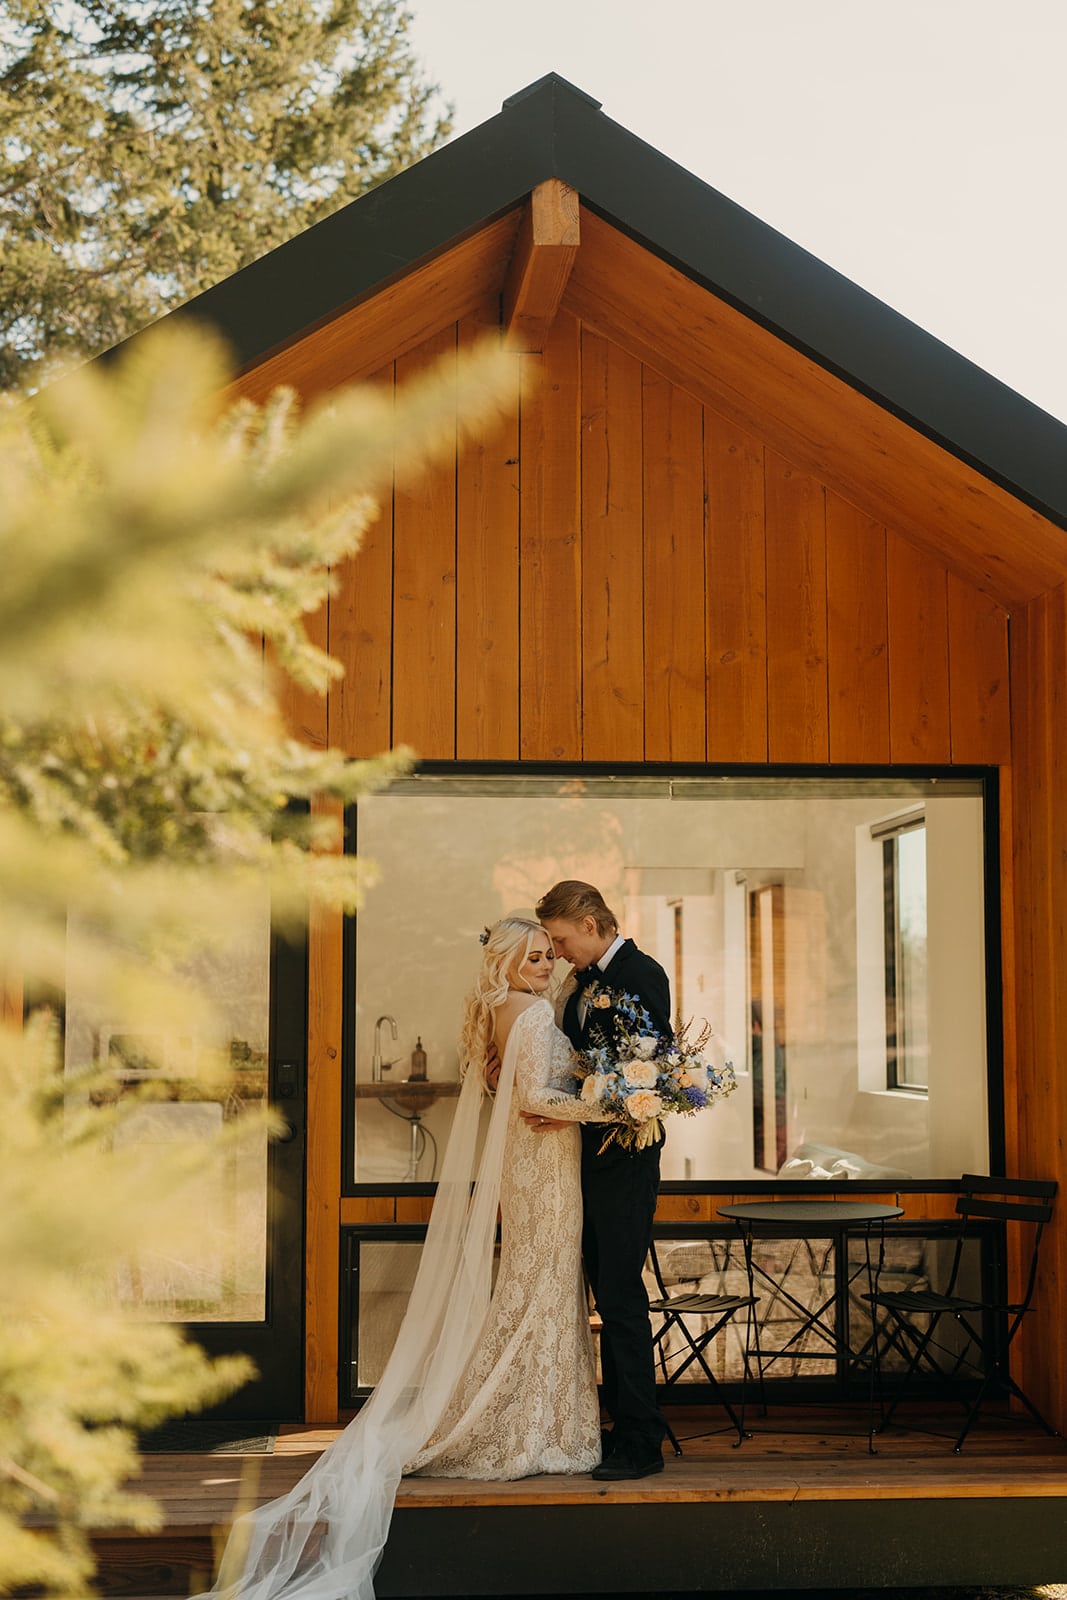 Saltwater Farm Wedding space where the couple shares a first look.